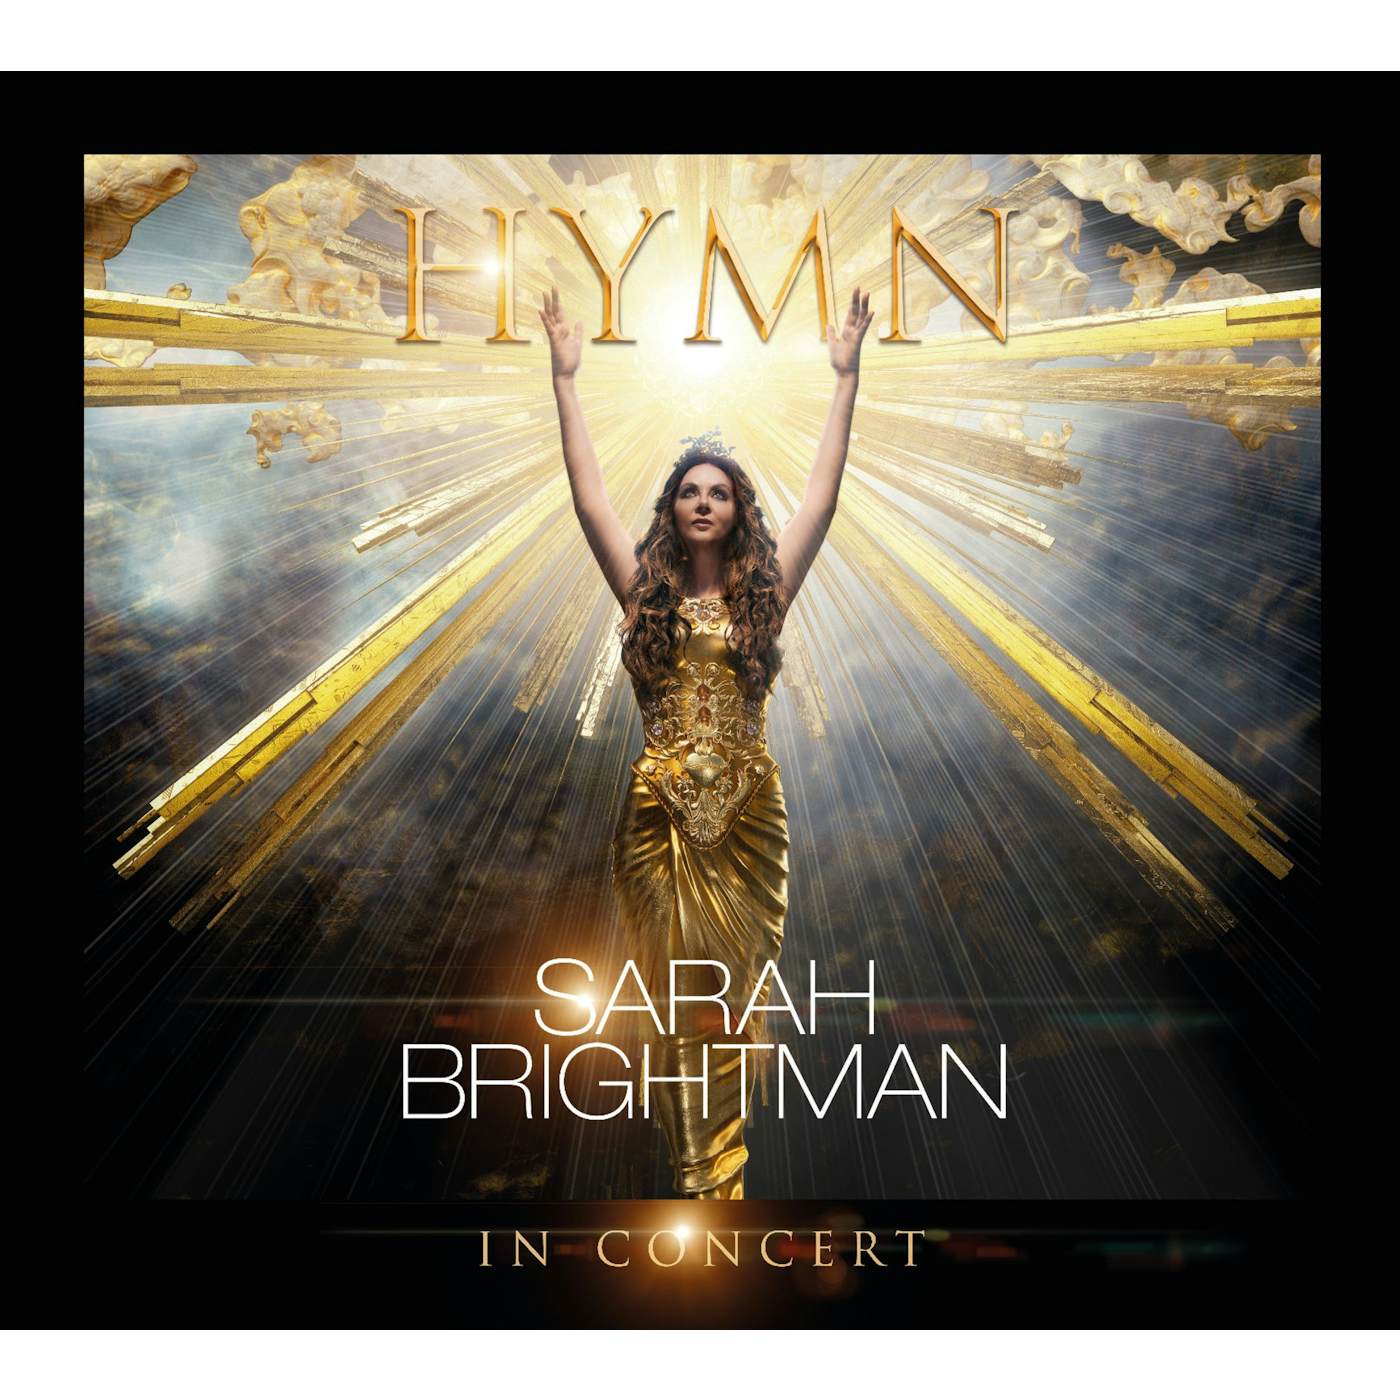 Sarah Brightman HYMN IN CONCERT - Deluxe Edition Blu-ray/CD